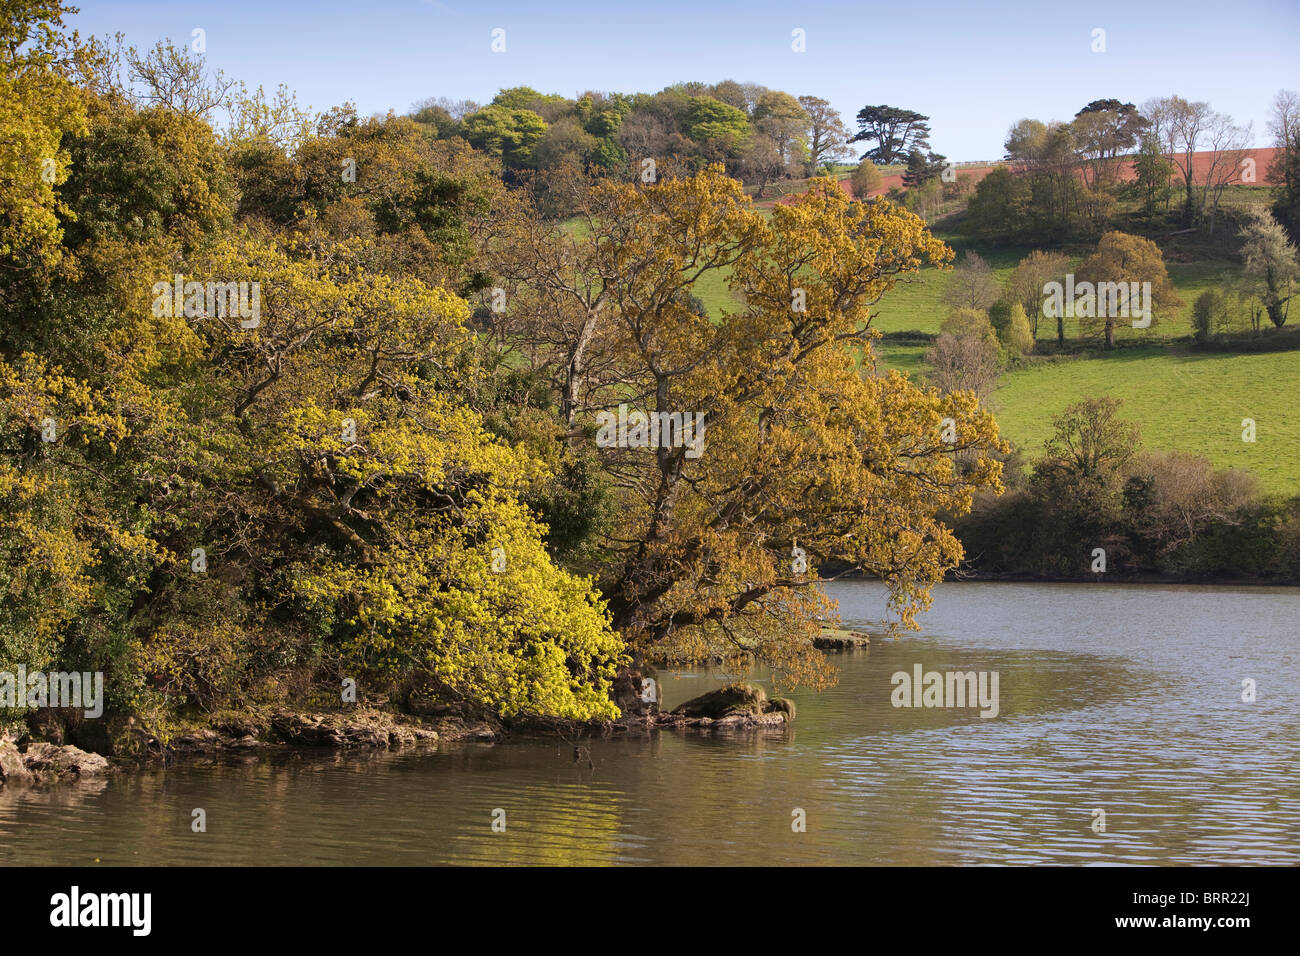 UK, England, Devon, River Dart riverbank trees in new leaf on bend in river Stock Photo